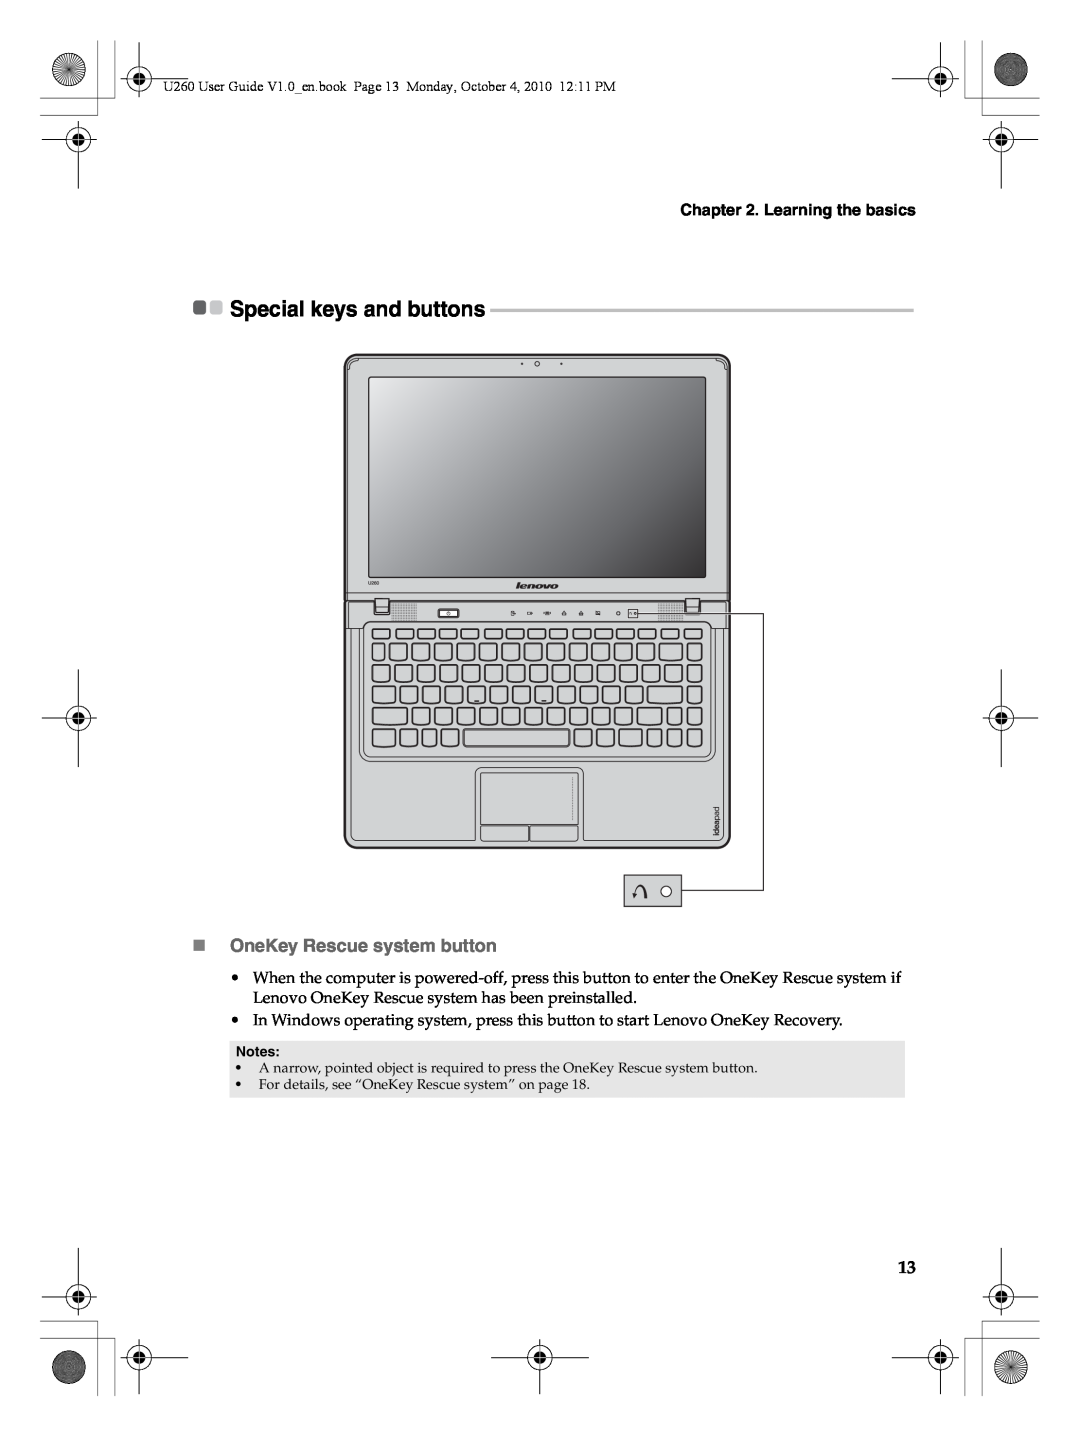 Lenovo U260 manual Special keys and buttons, „OneKey Rescue system button, Learning the basics 